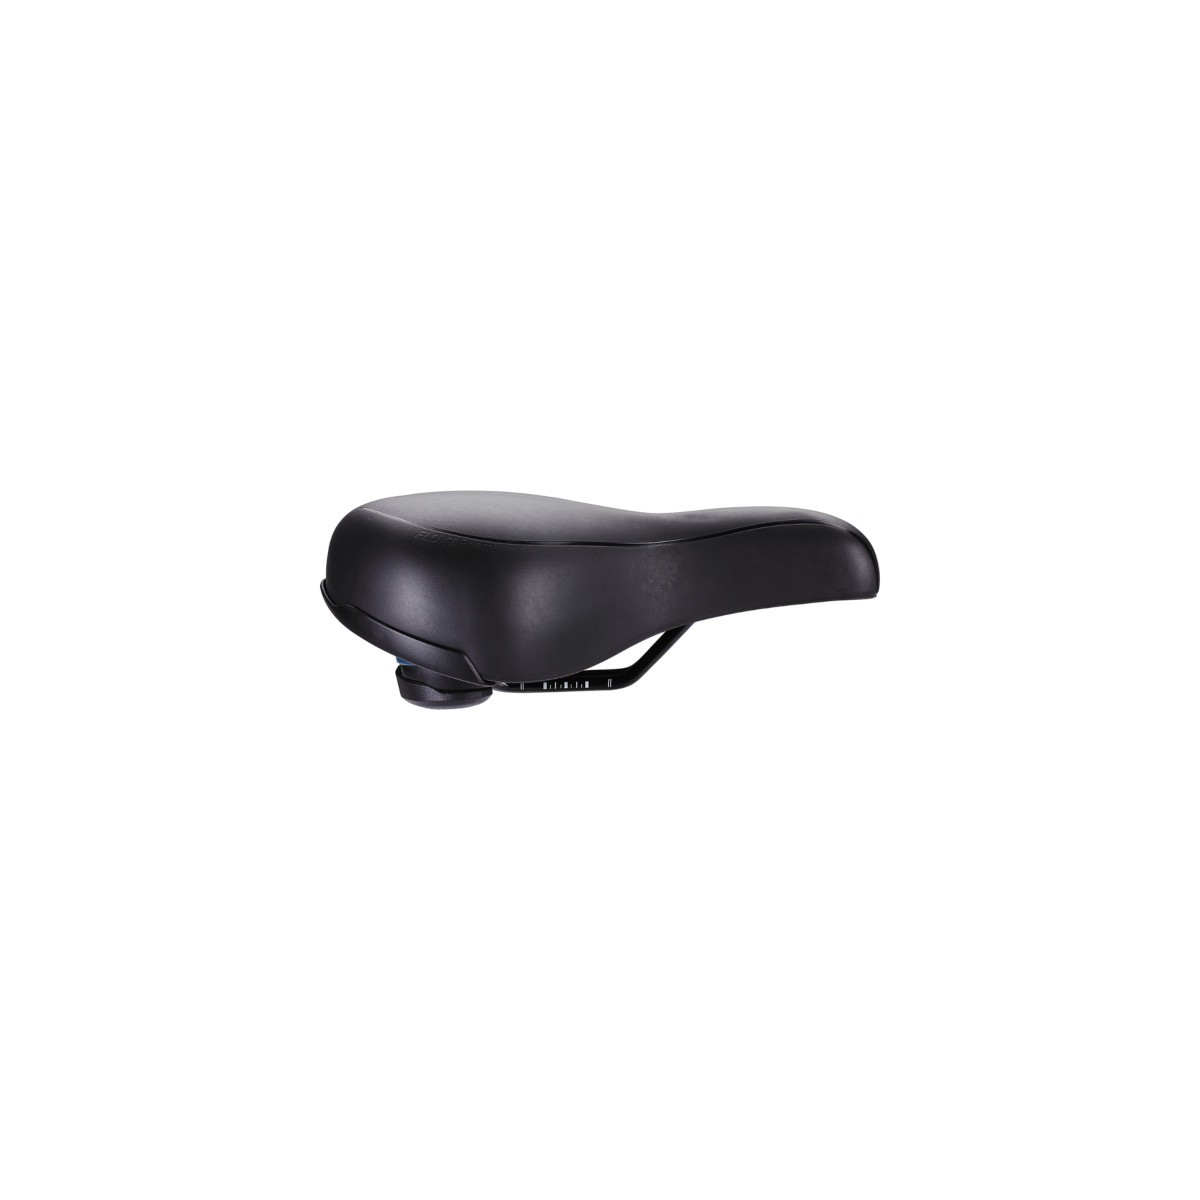 Selle City "Meander Upright" 225 x 270 mm